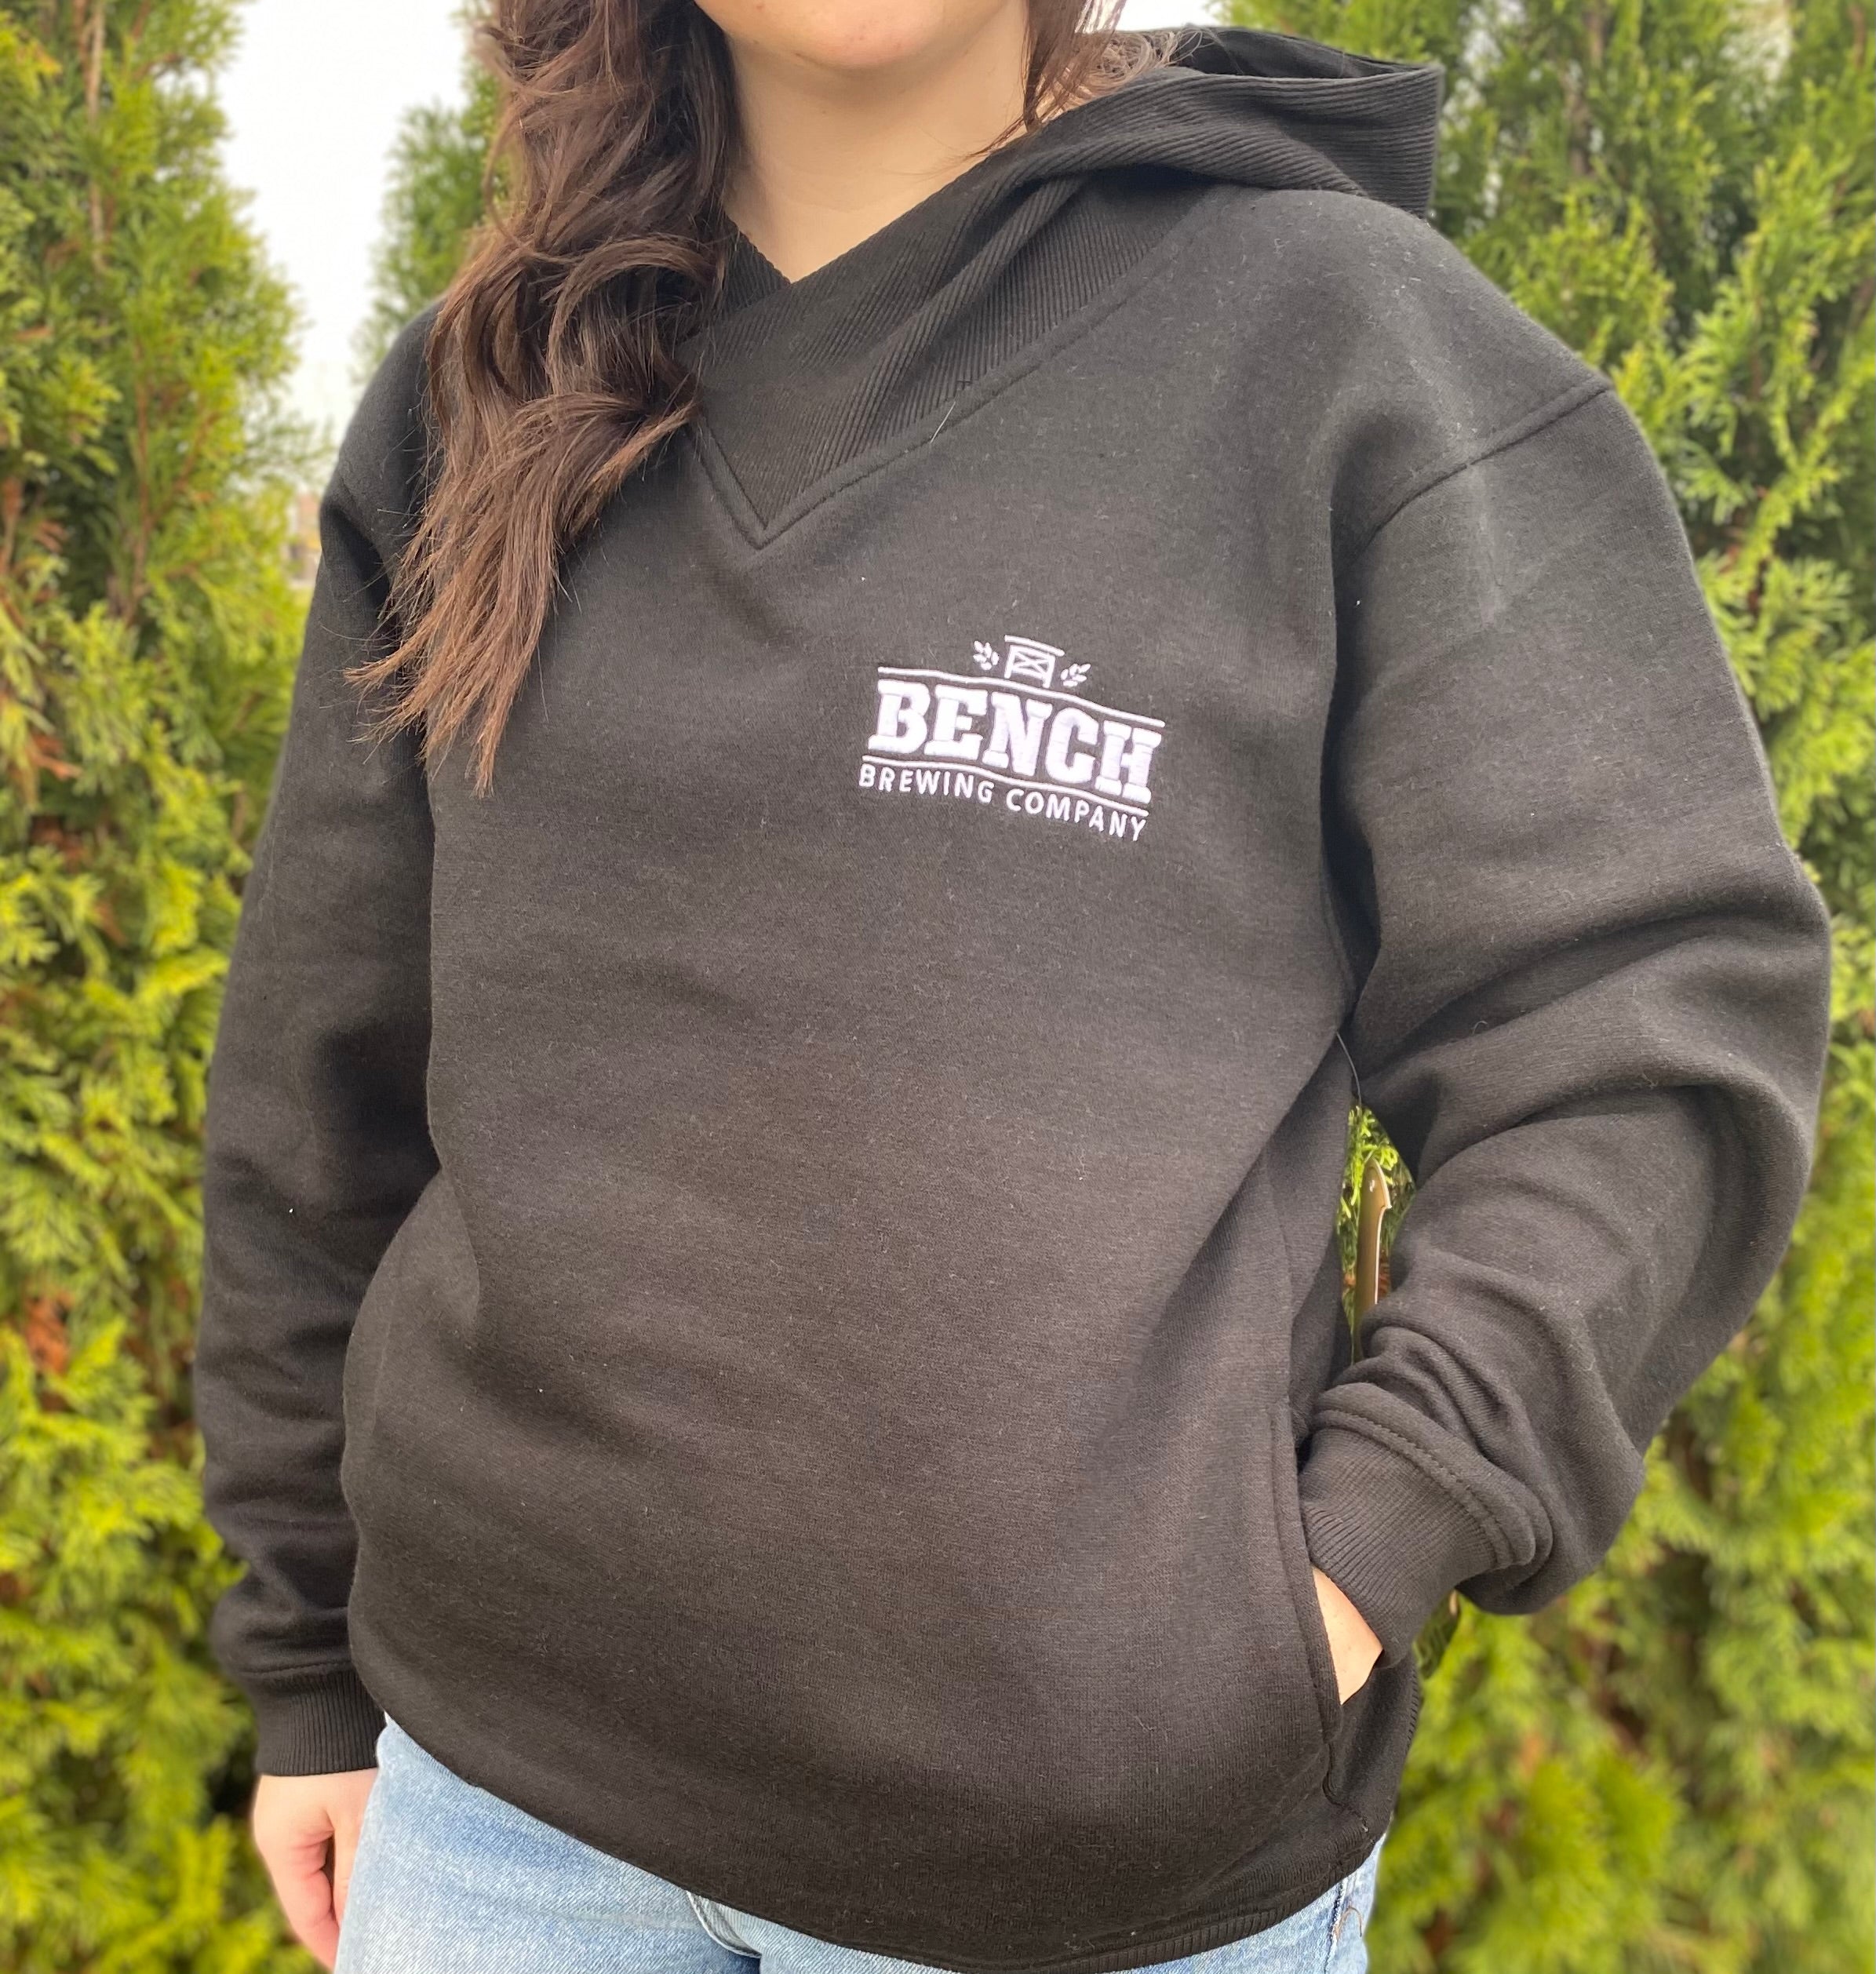 Bench Women's Pullover Hoodie – Bench Brewing Company Shop